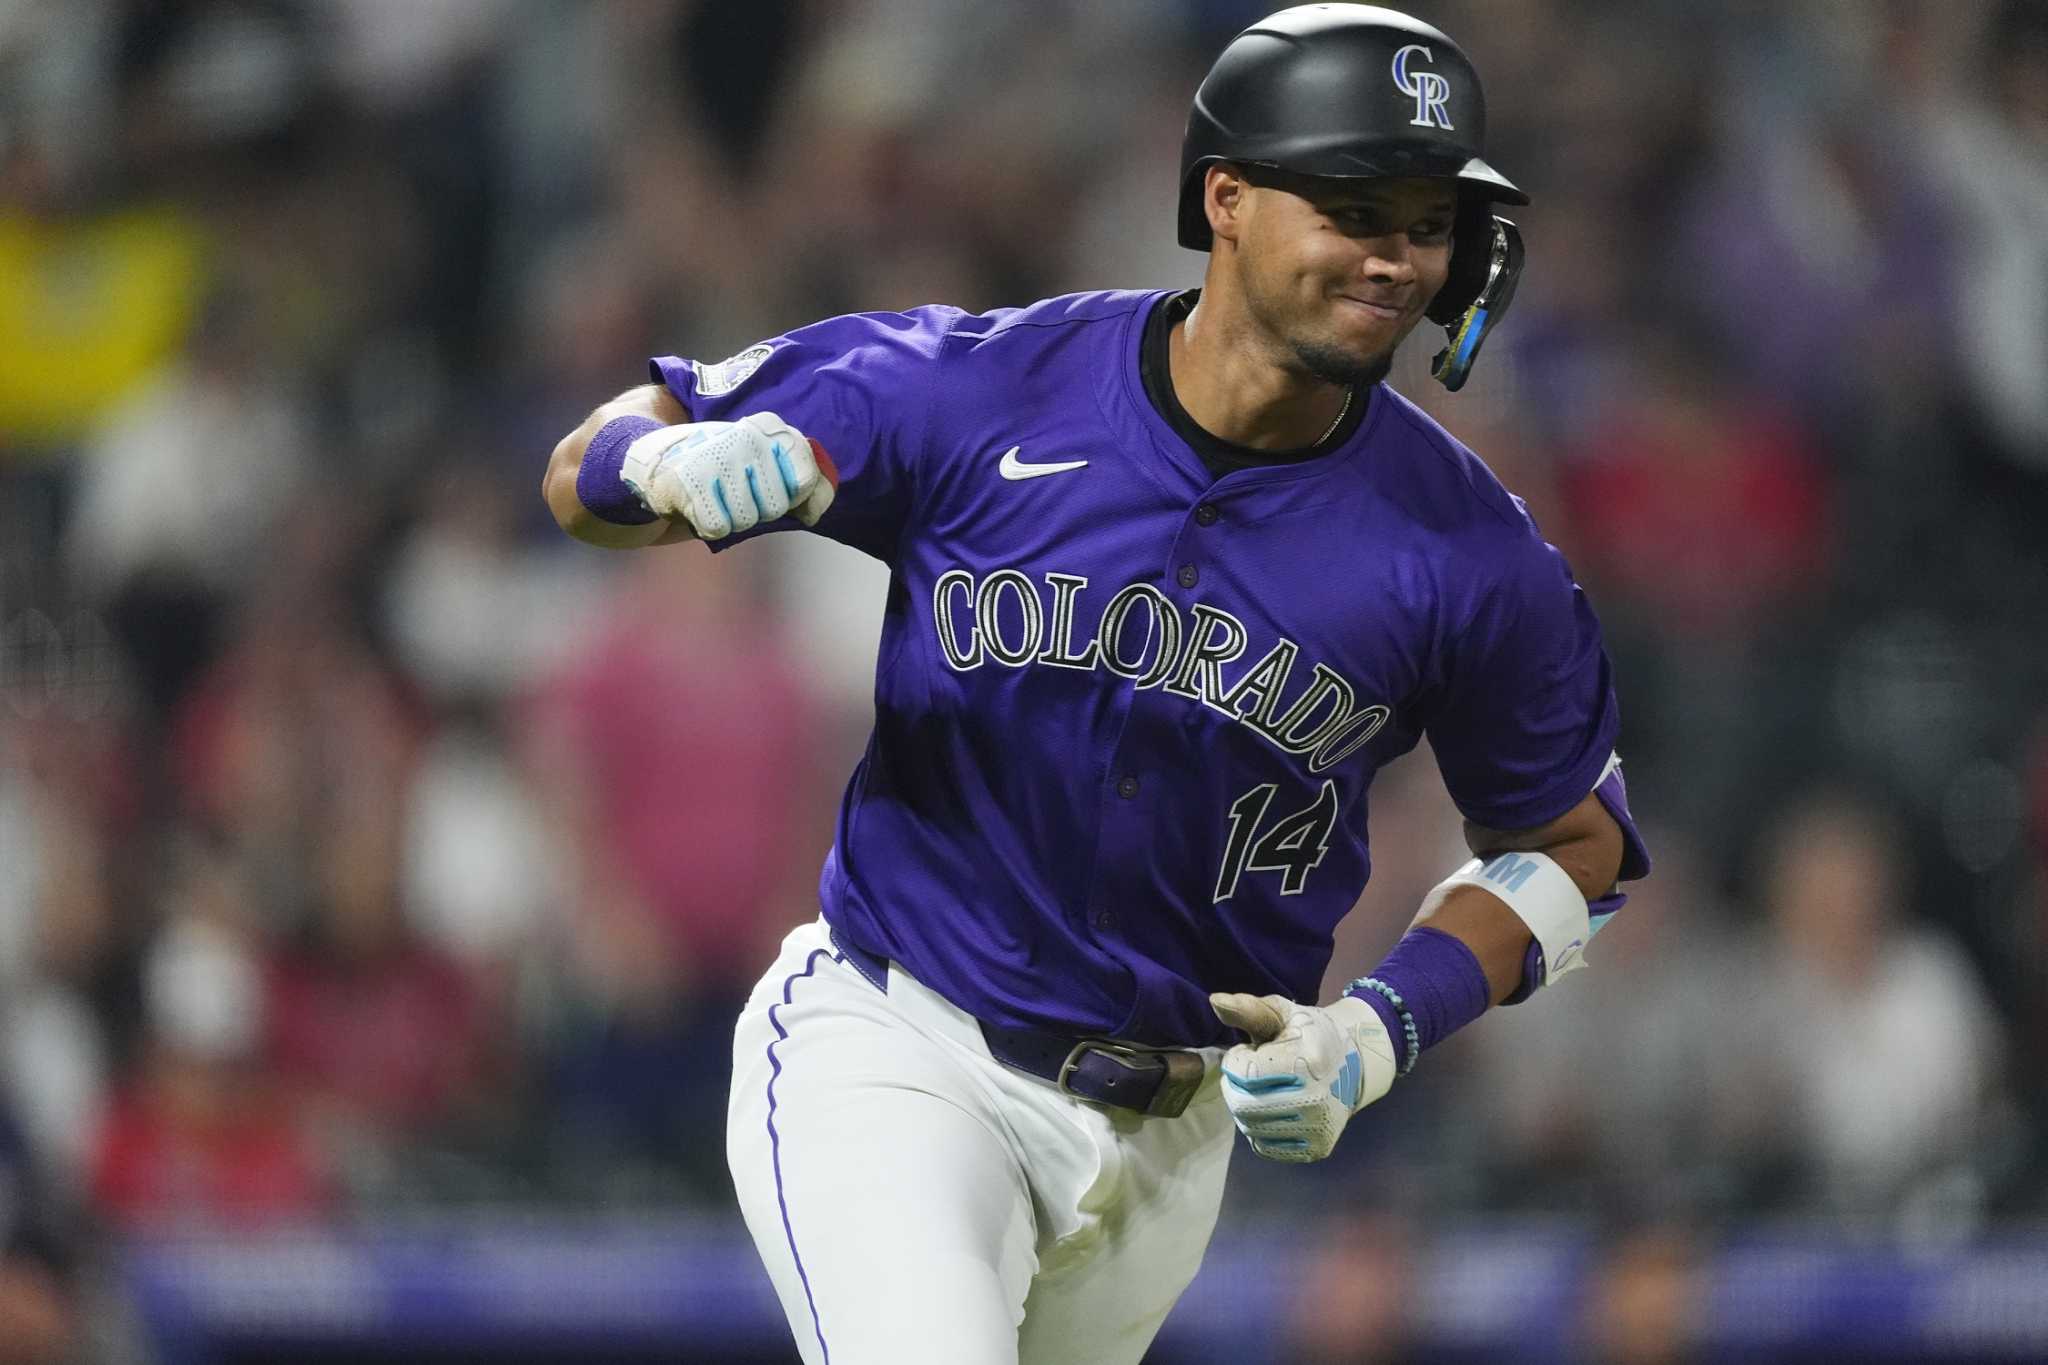 Tovar's single in 12th gives Rockies 9-8 win, extending Red Sox skid to 4